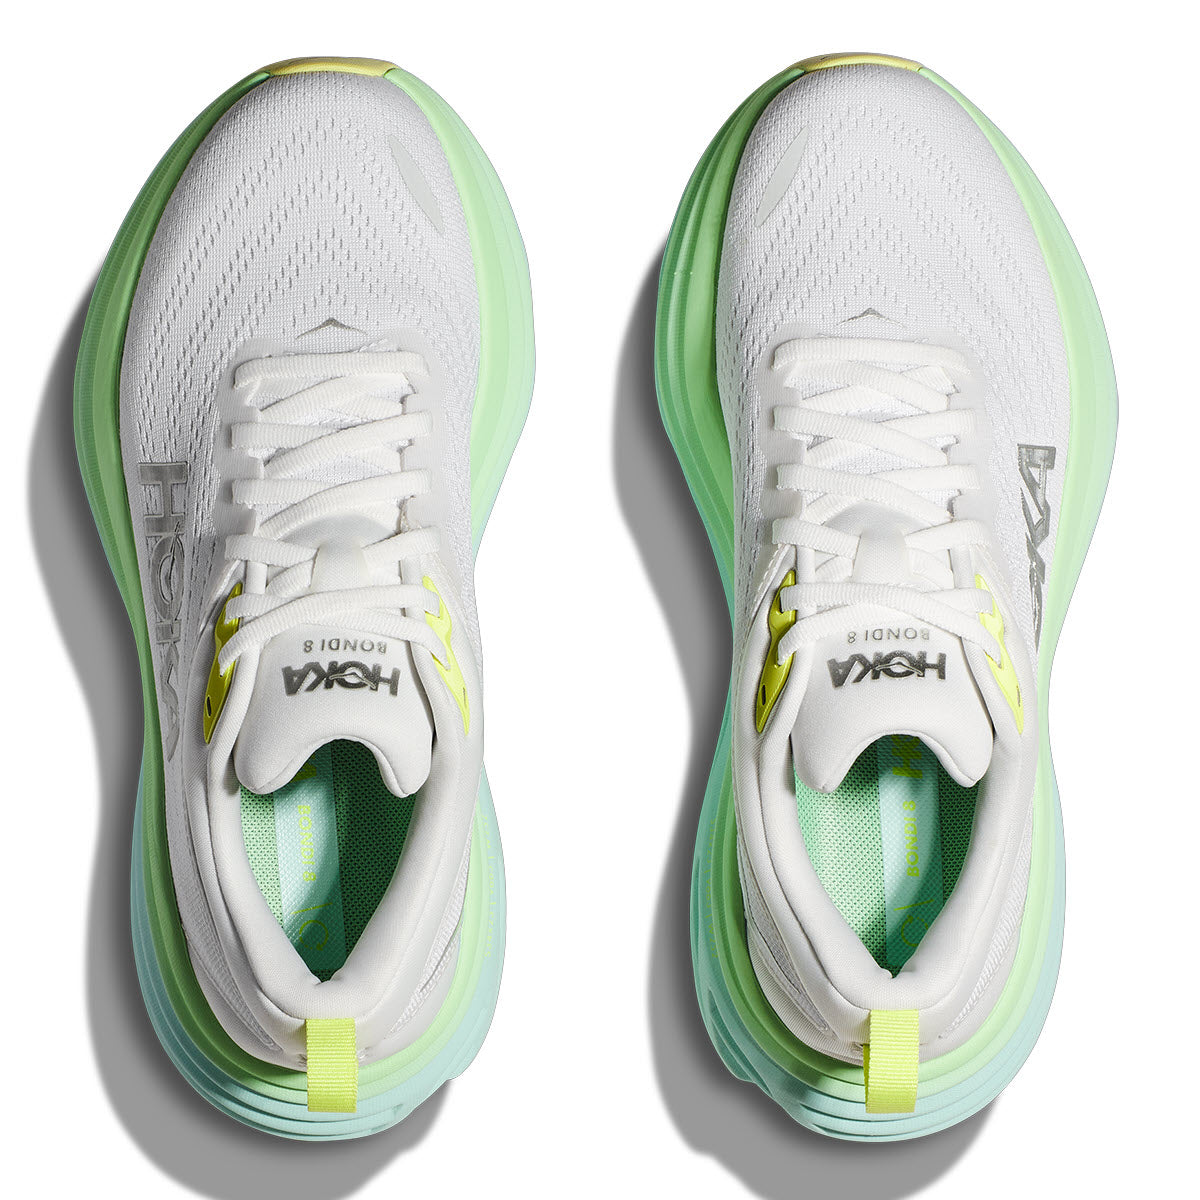 A pair of white Hoka Bondi 8 Blanc de Blanc/Sunlit Ocean running shoes with neon green accents and extended heel geometry, viewed from above.